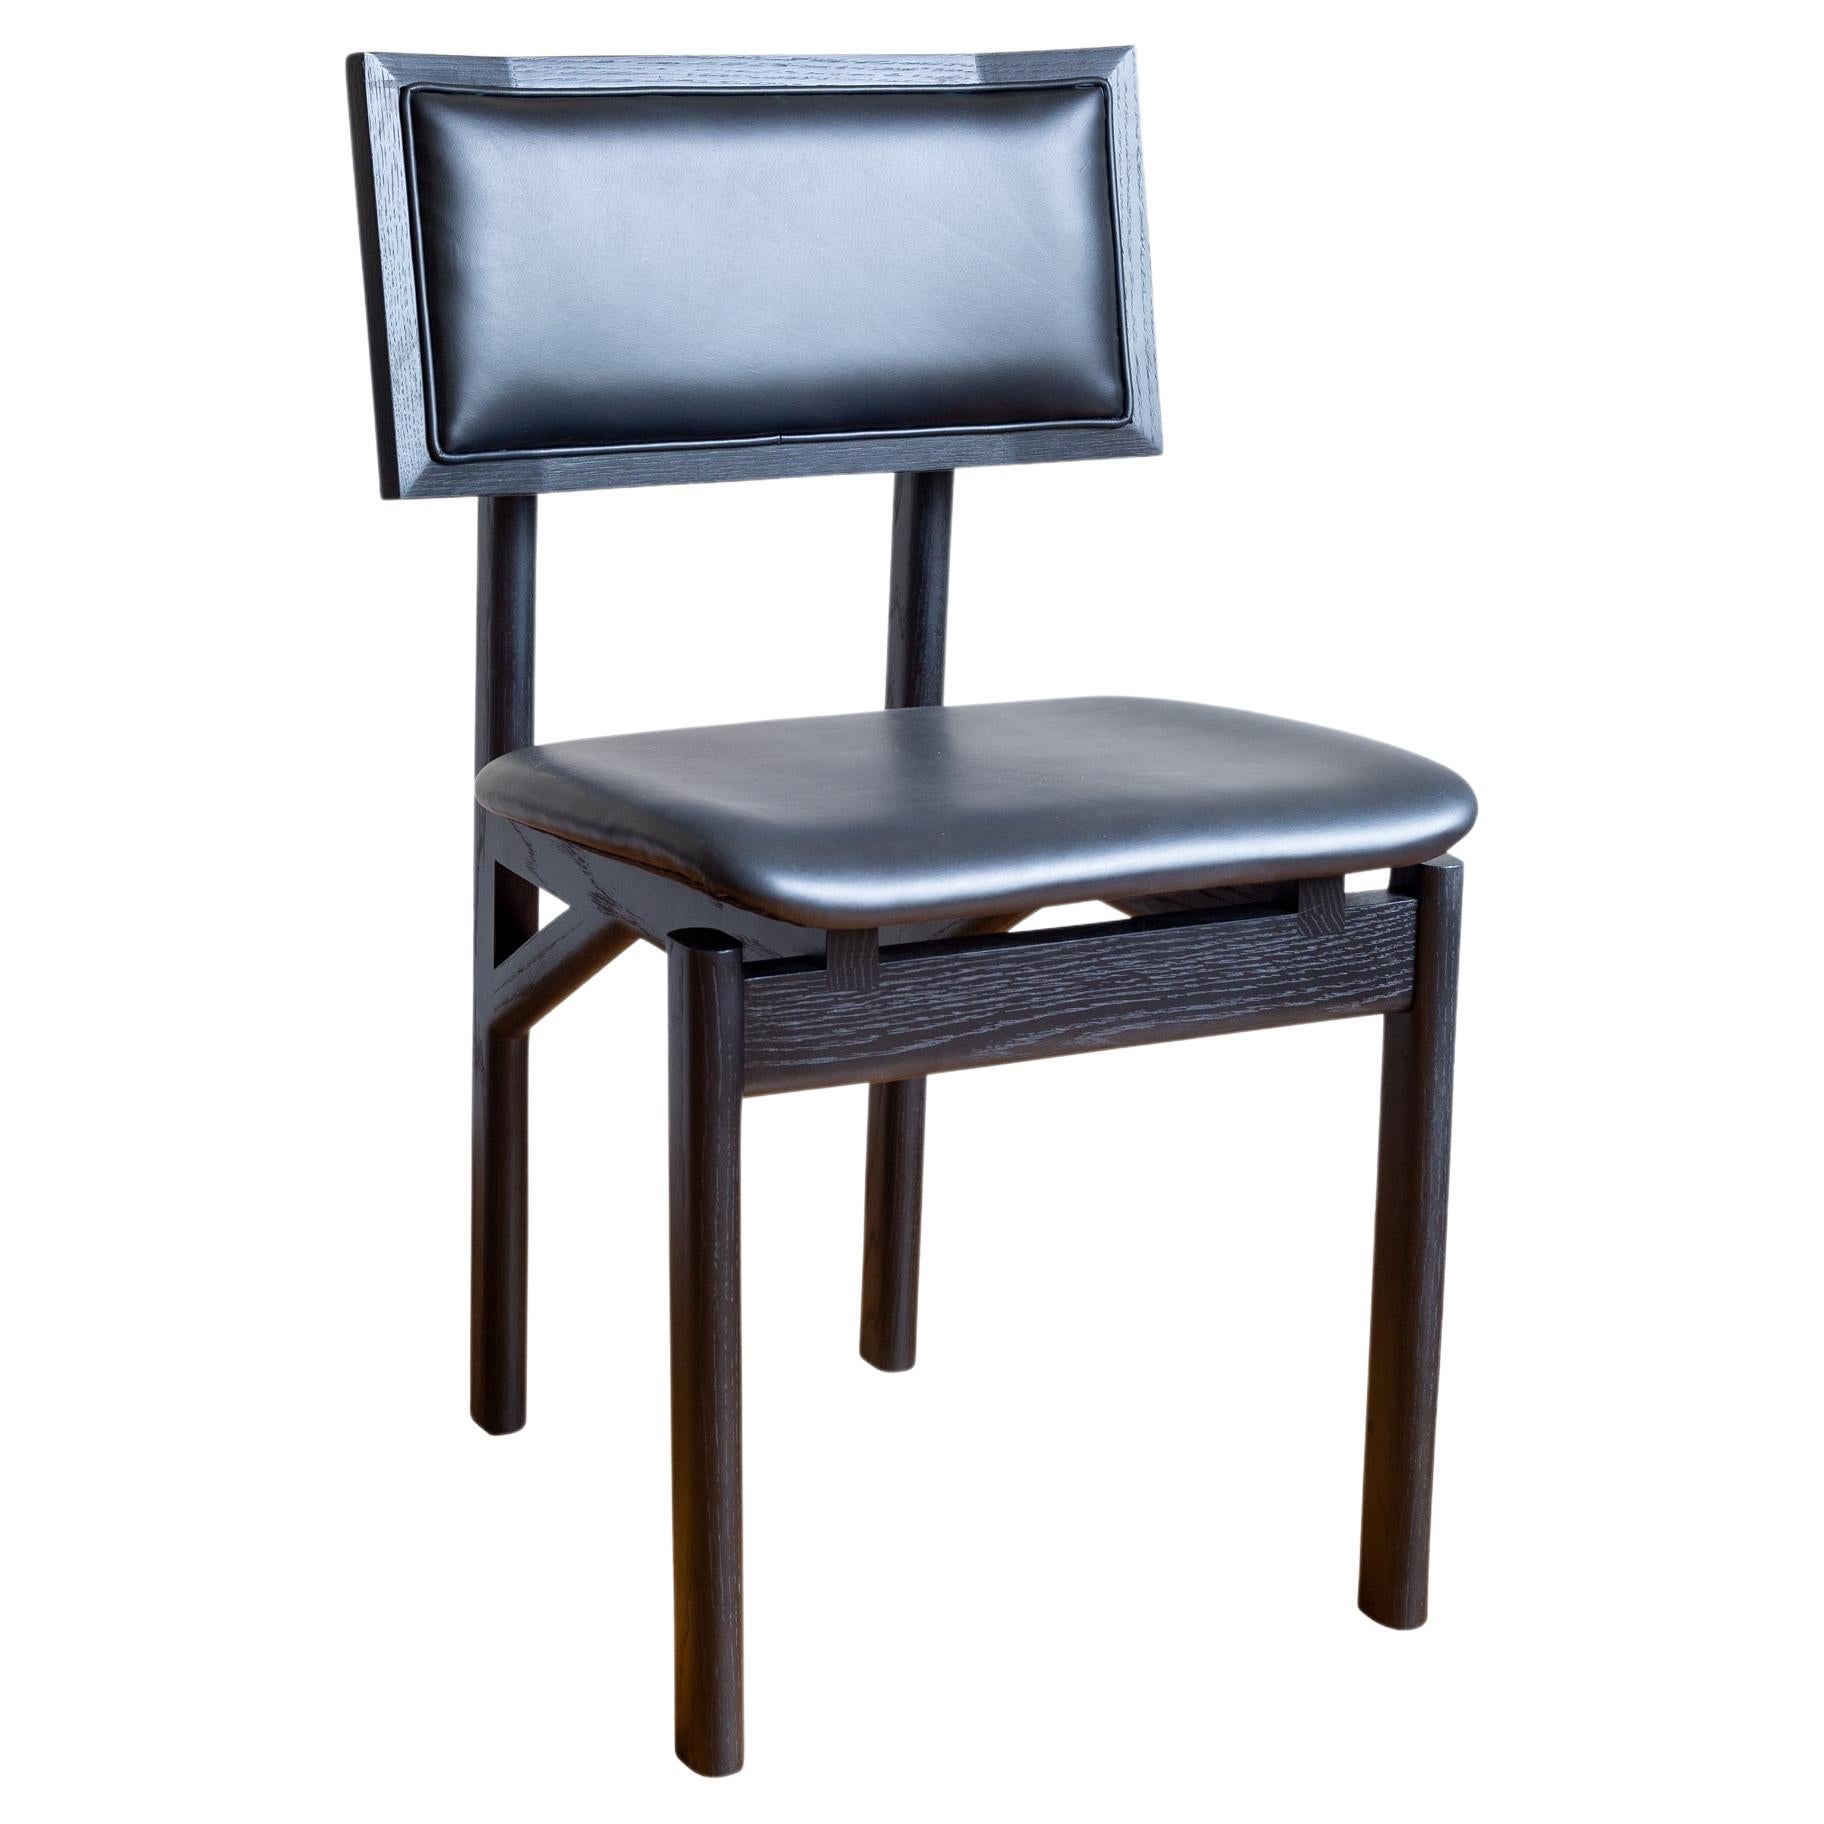 Handmade Ebonized Oak KUNAI Dining Chair with Black Leather Upholstery For Sale